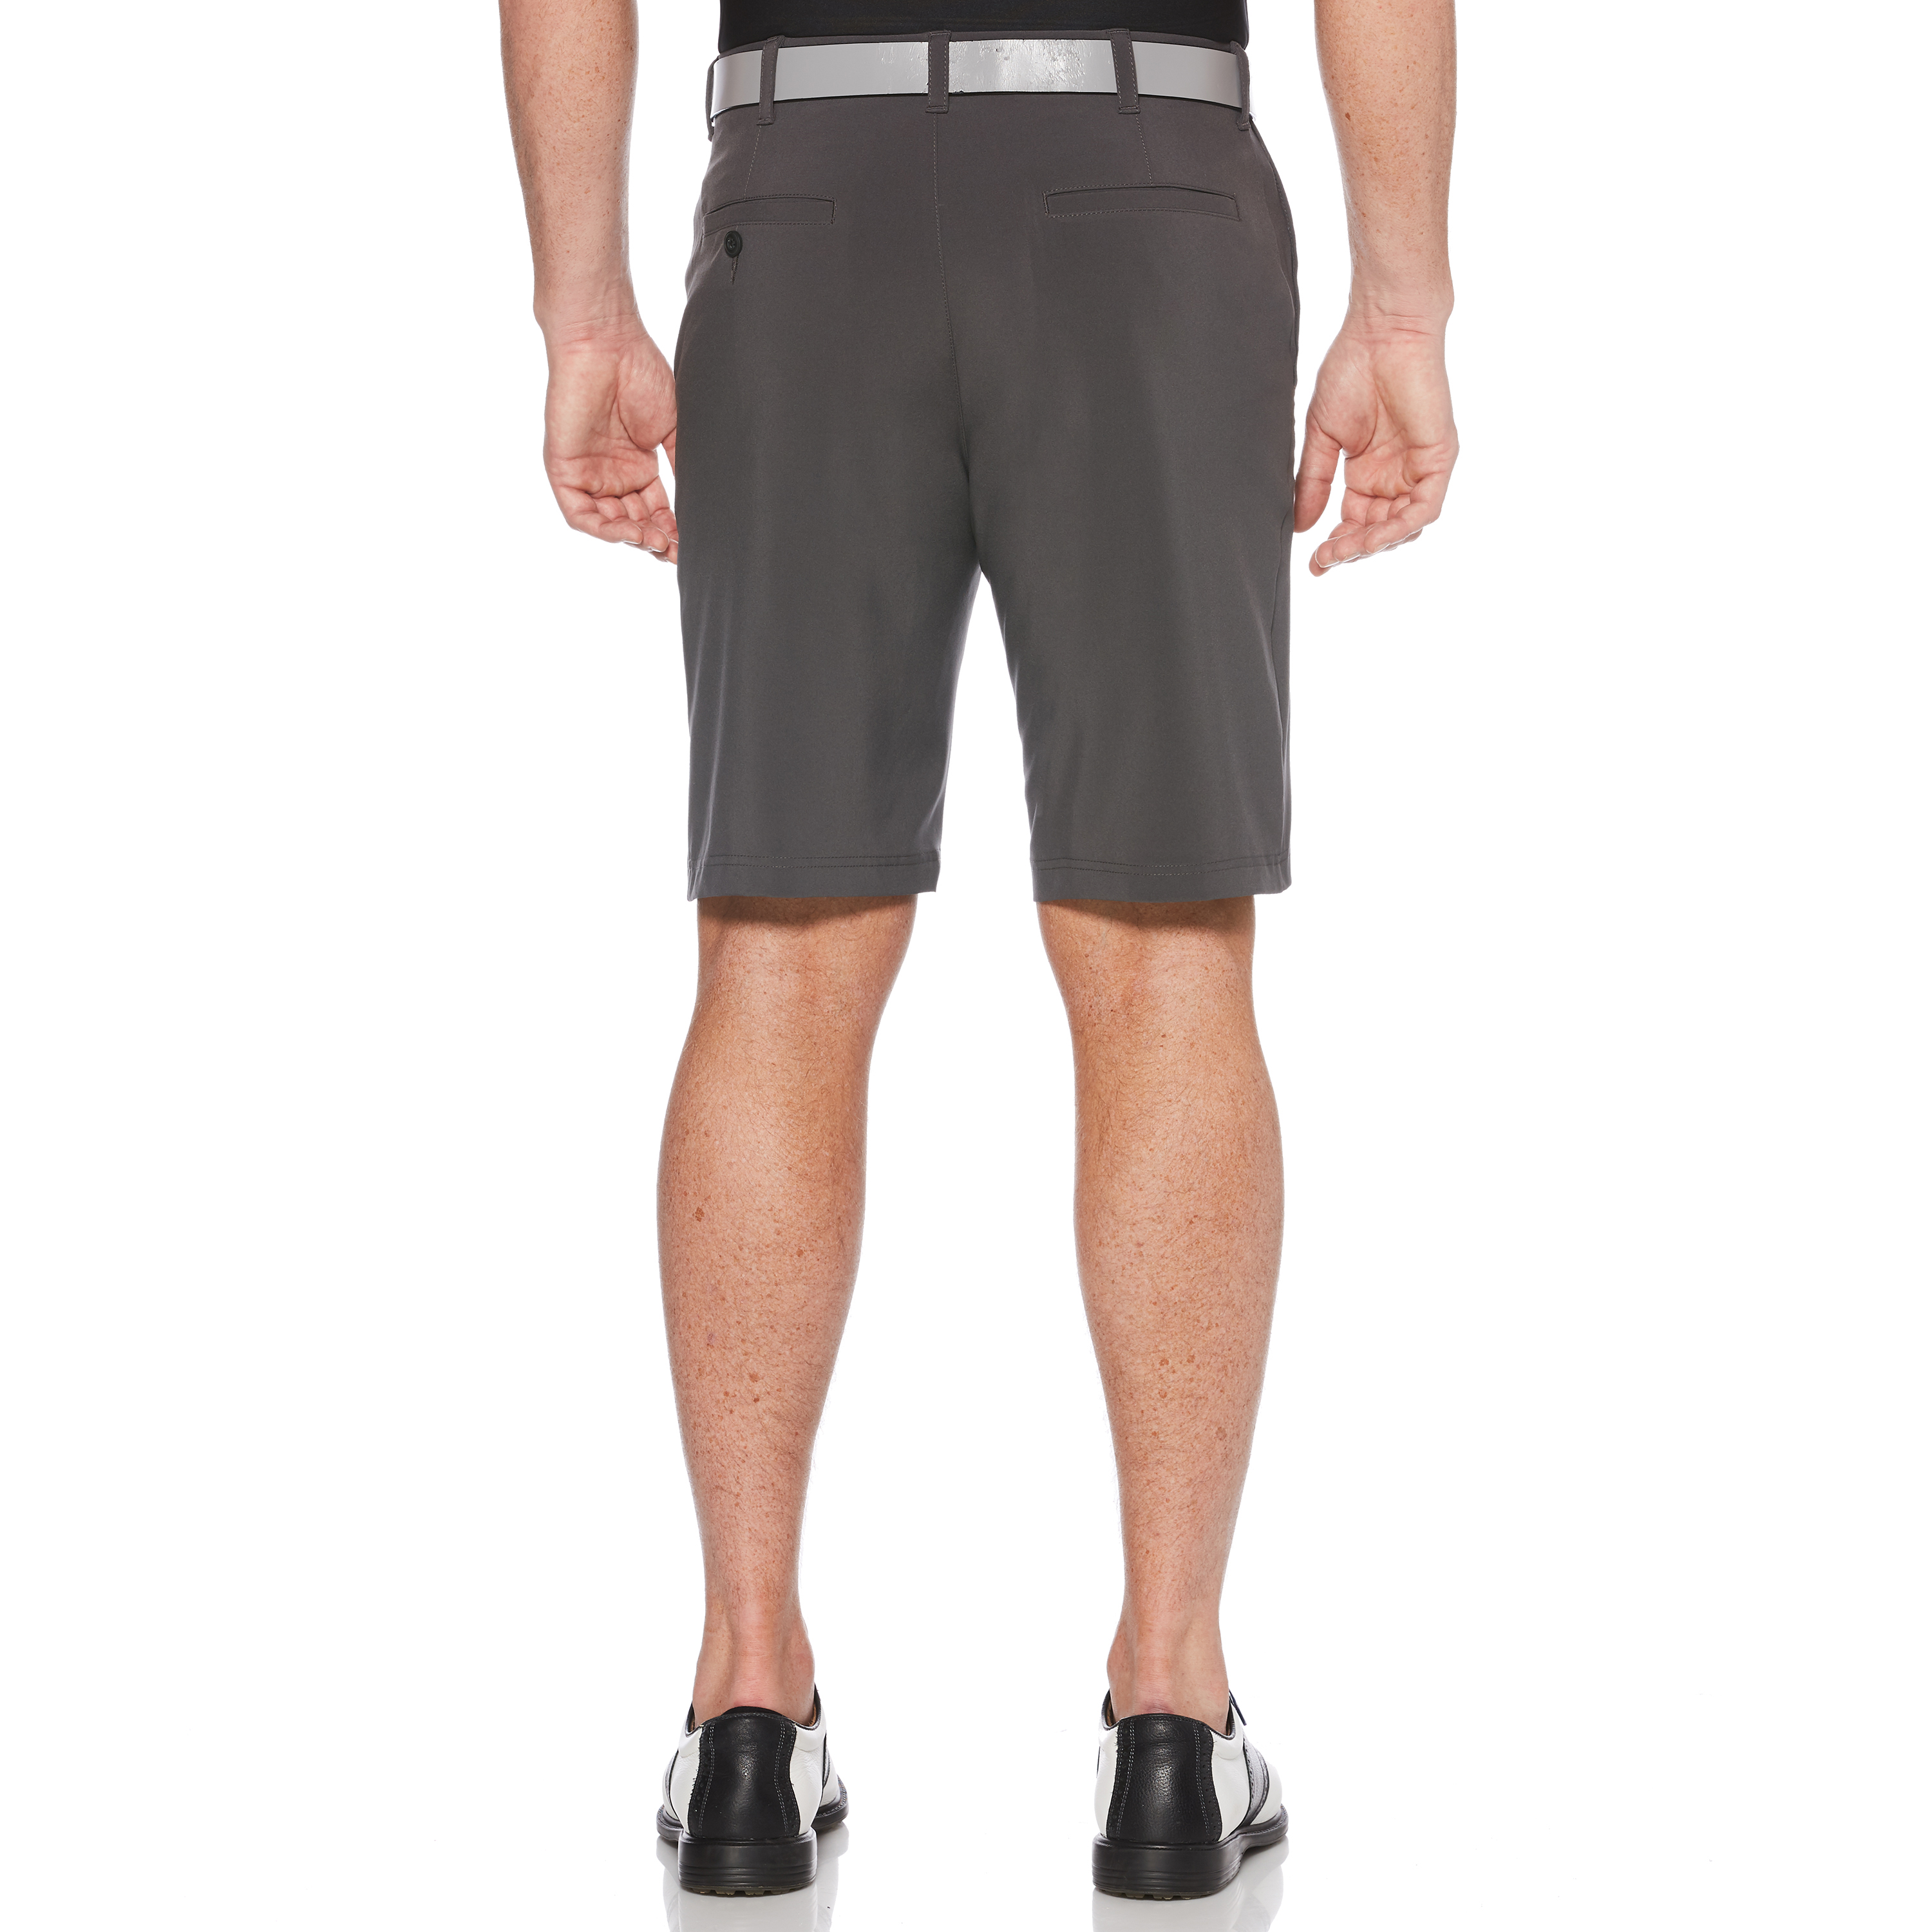 Ben Hogan Performance Men's Flat Front Active Flex Stretch Golf Short, up to 54 inches - image 3 of 5